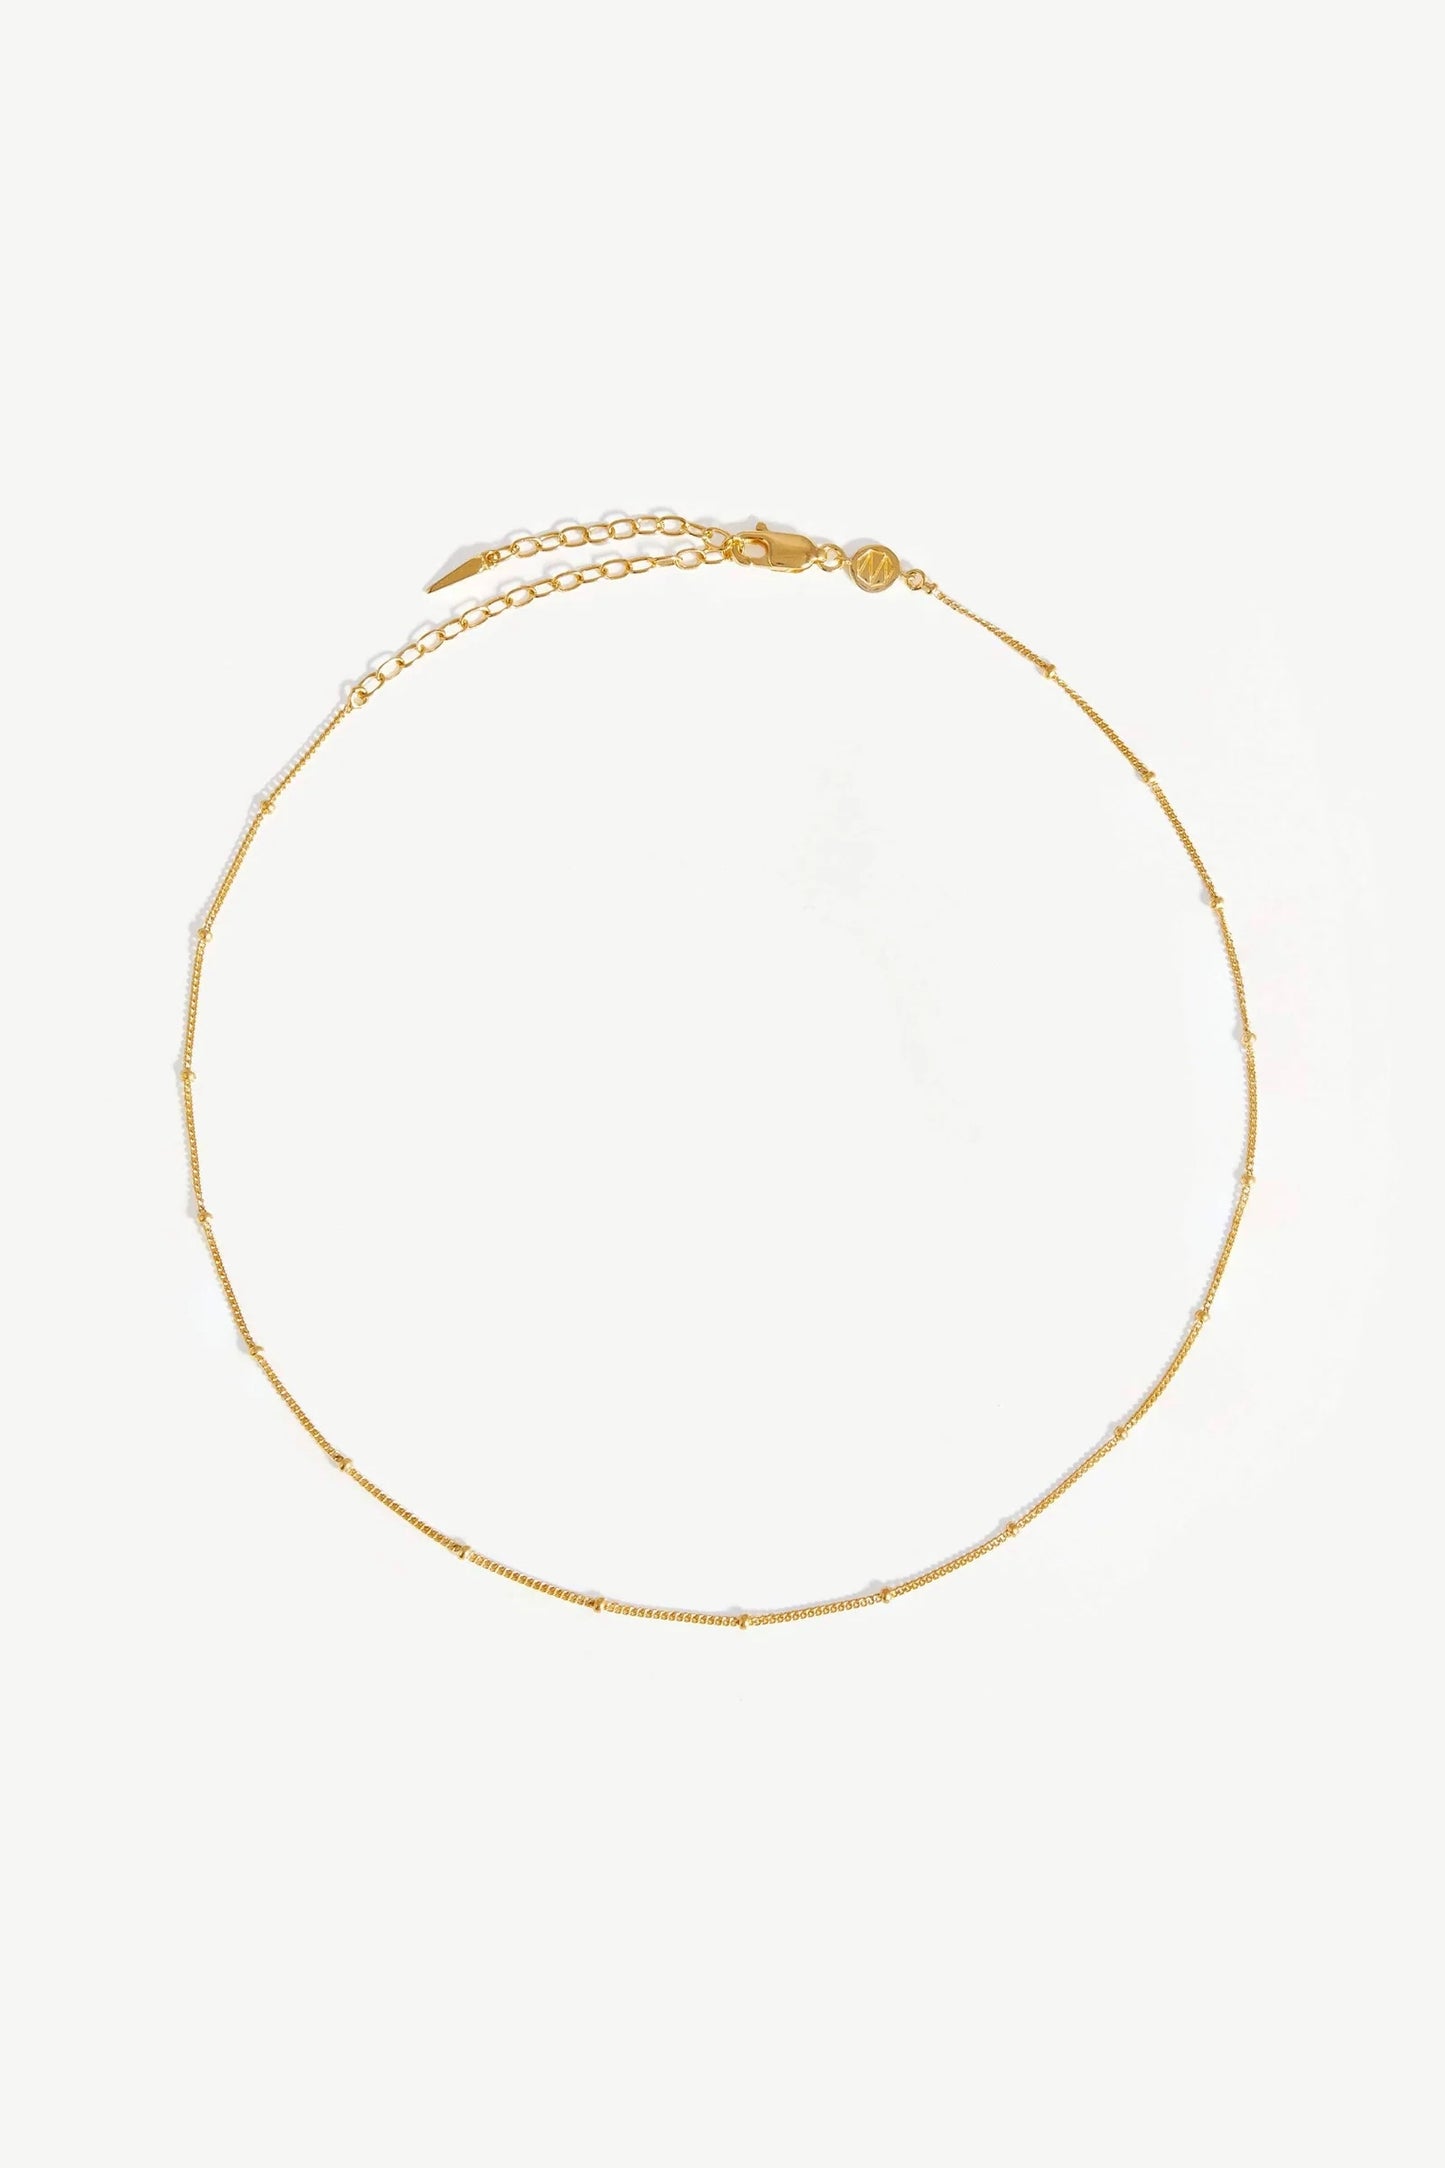 Tidal Twist Chain Necklace 18ct Gold Plate – Daisy London